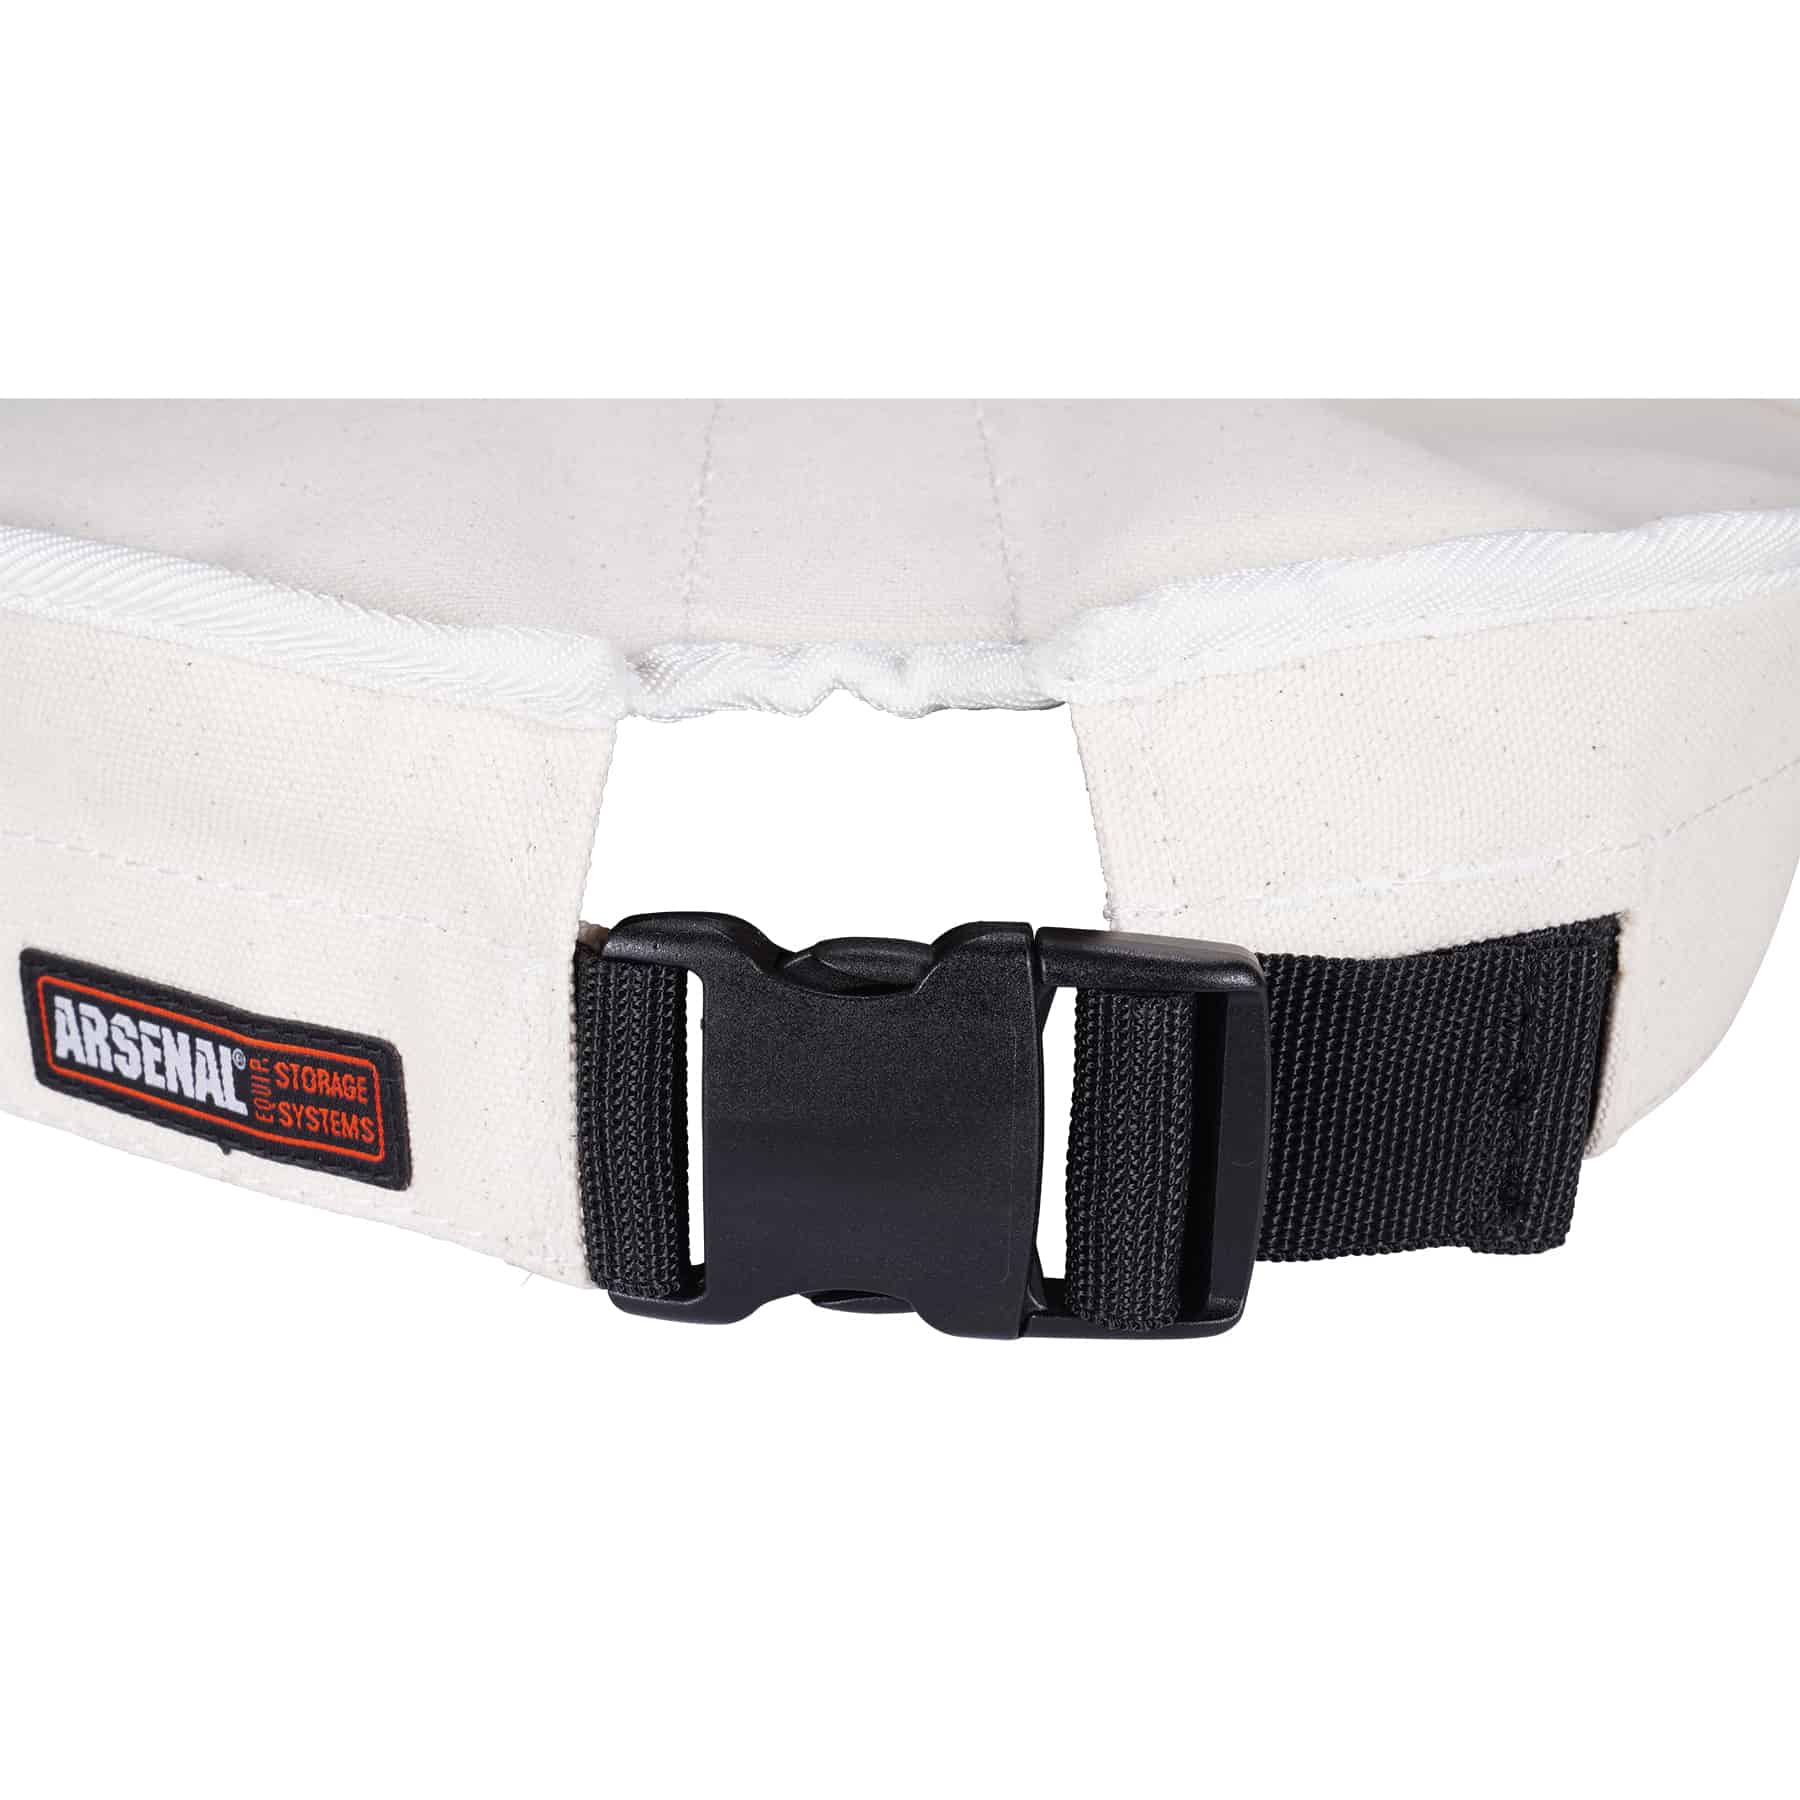 Ergodyne Arsenal 5738 12.5 Inch Canvas Bucket Safety Top from GME Supply